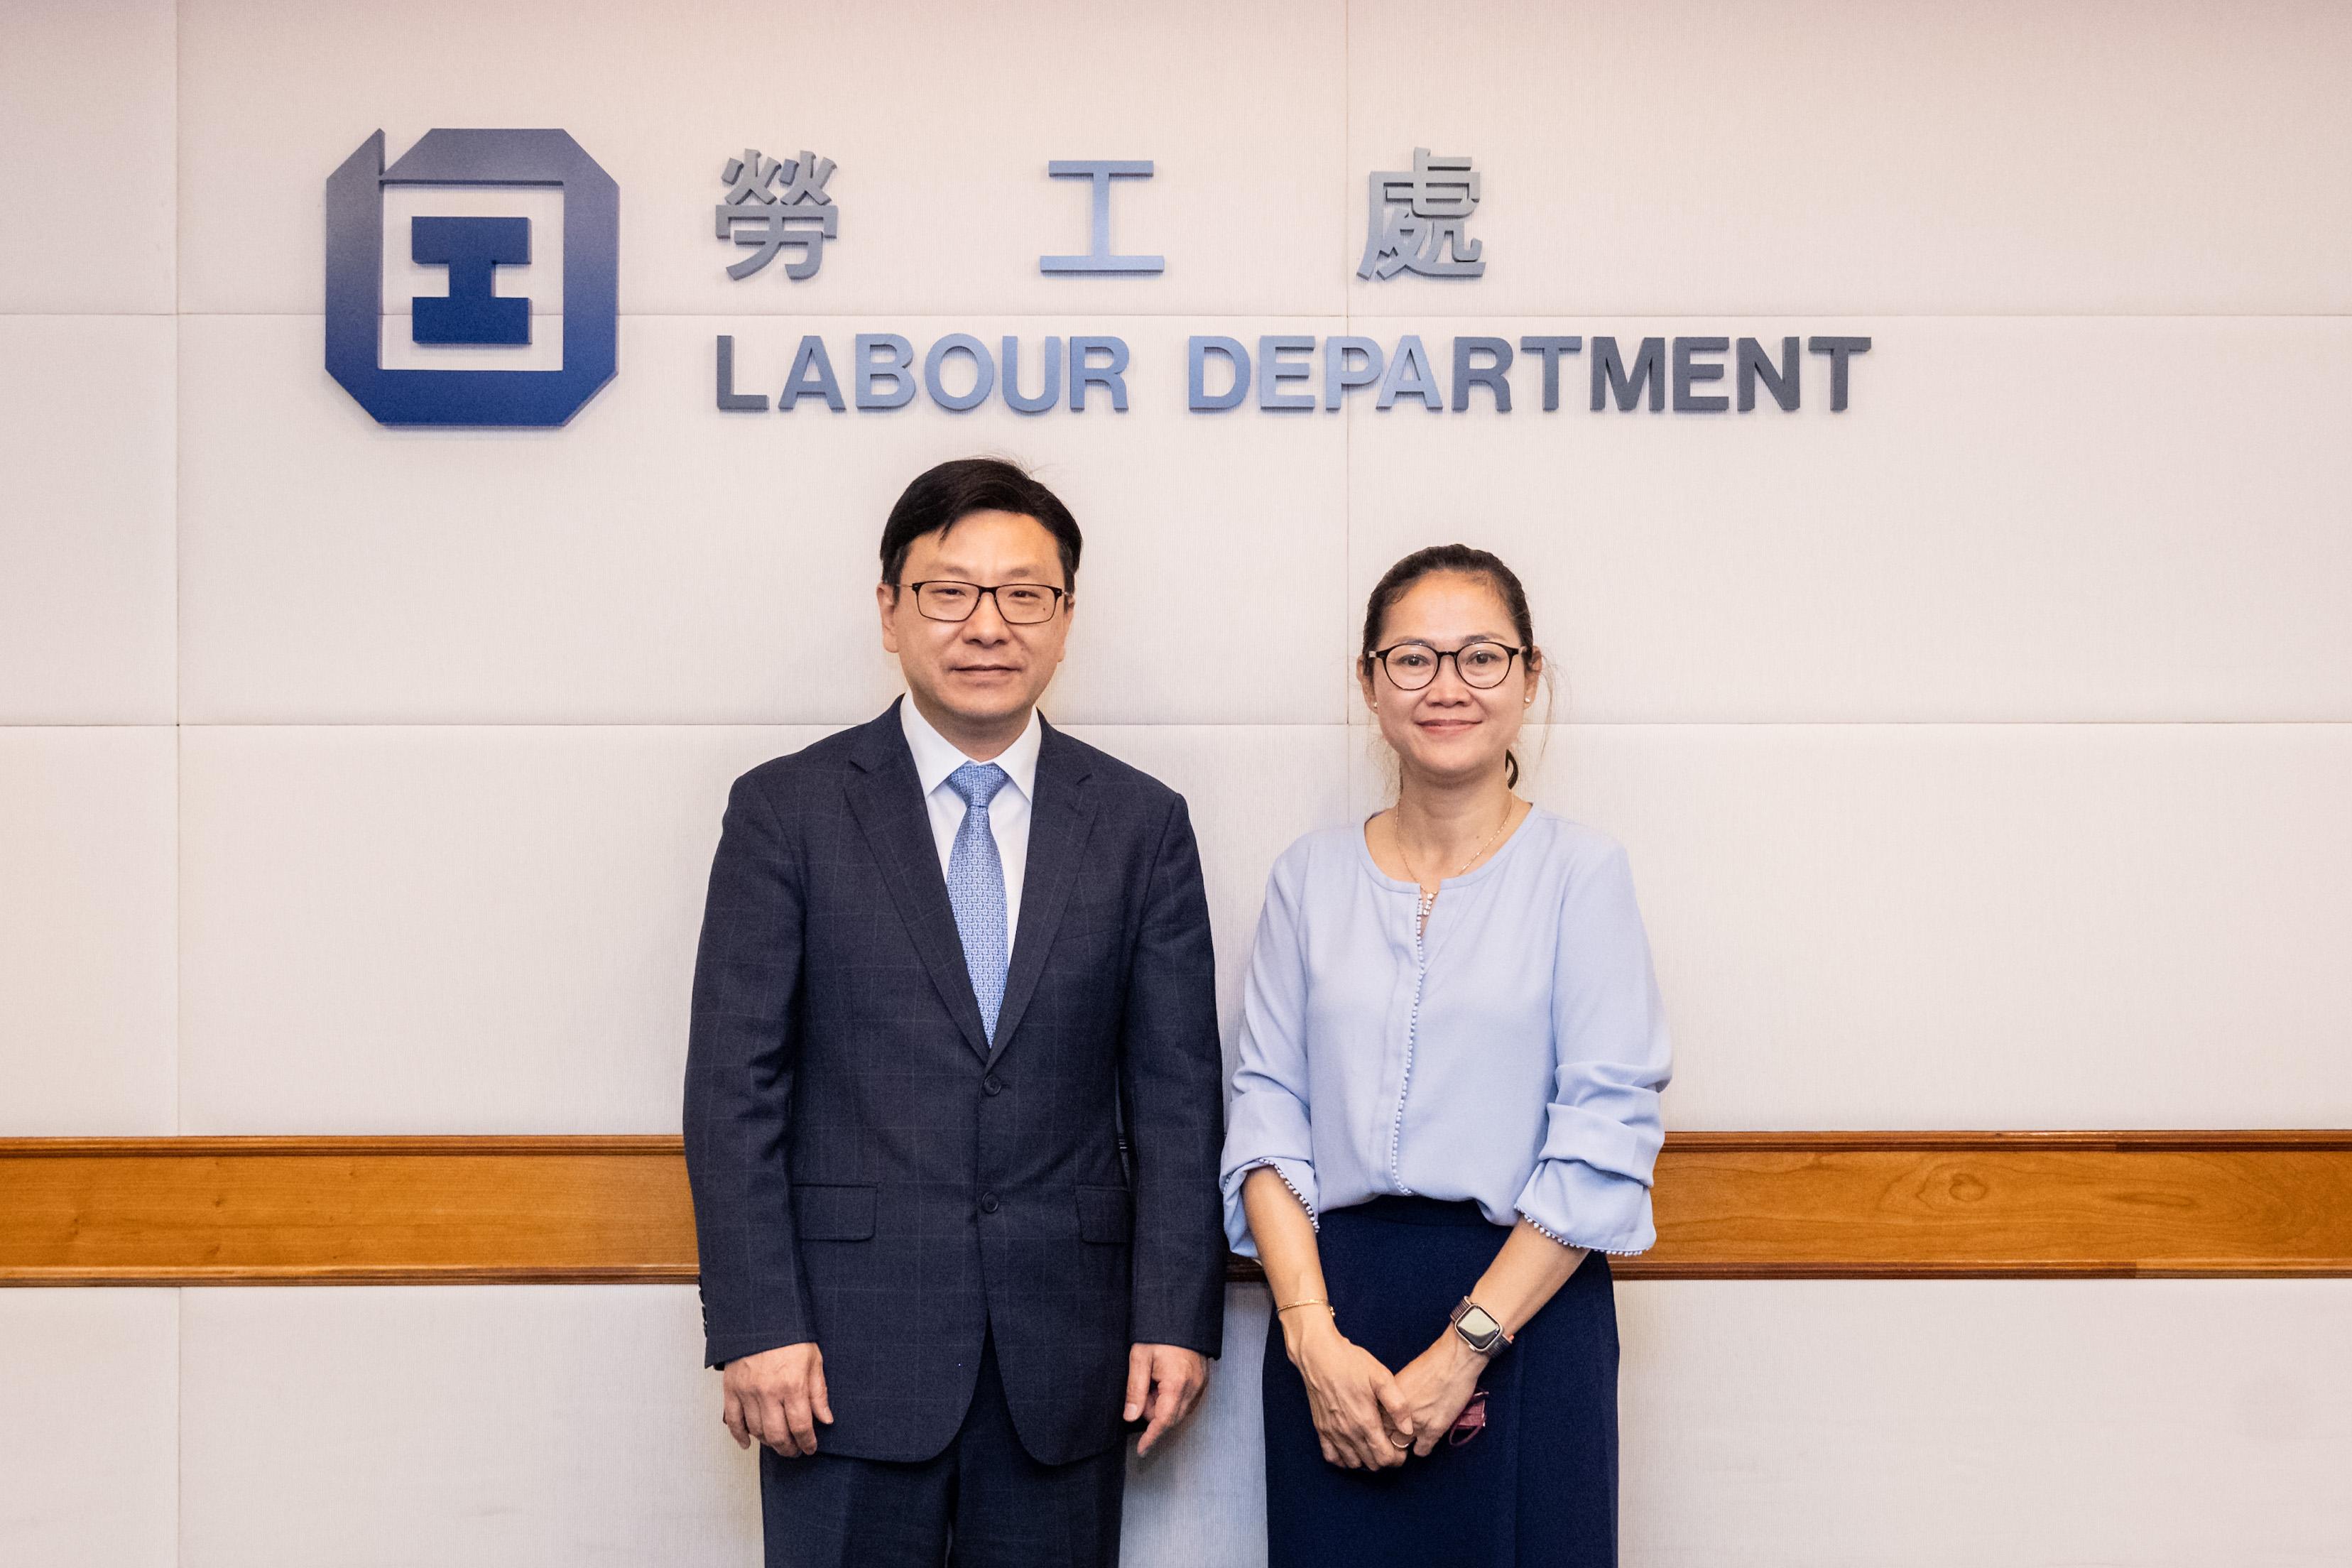 The Secretary for Labour and Welfare, Mr Chris Sun (left), met the Consul-General of the Kingdom of Cambodia in Hong Kong, Ms Pech Puthisathbopeaneaky (right), on the afternoon of August 8 to exchange views on widening the sources of foreign domestic helpers (FDHs). Mr Sun encouraged and welcomed more nationals from Cambodia to come to Hong Kong to work as FDHs. Representatives of the Labour Department also attended the meeting.